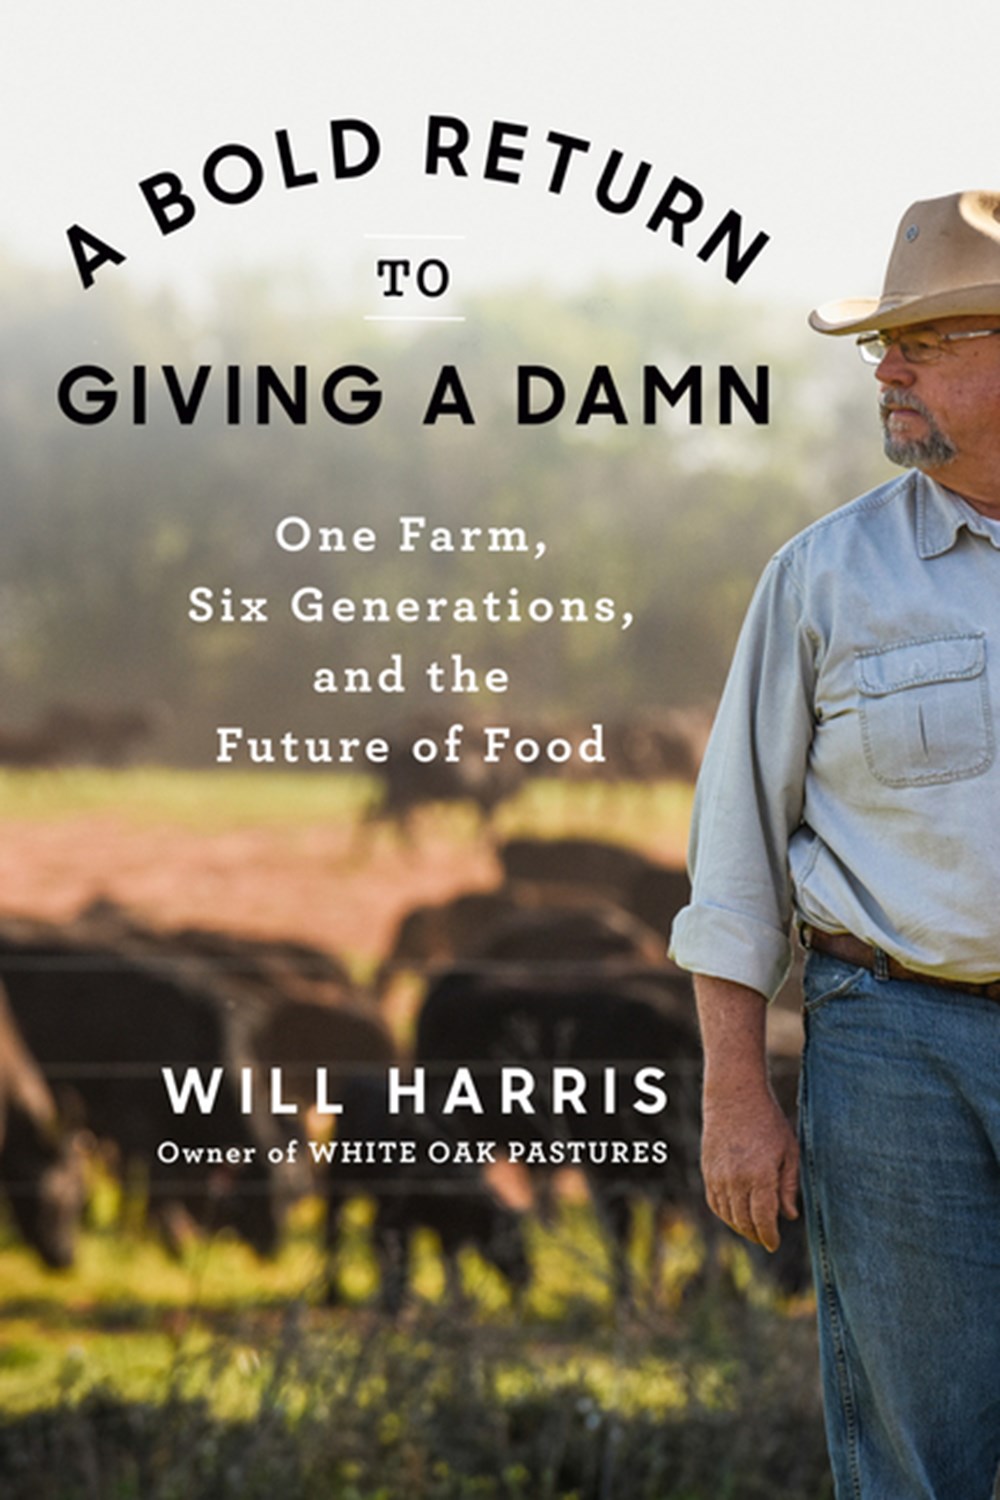 Bold Return to Giving a Damn: One Farm, Six Generations, and the Future of Food